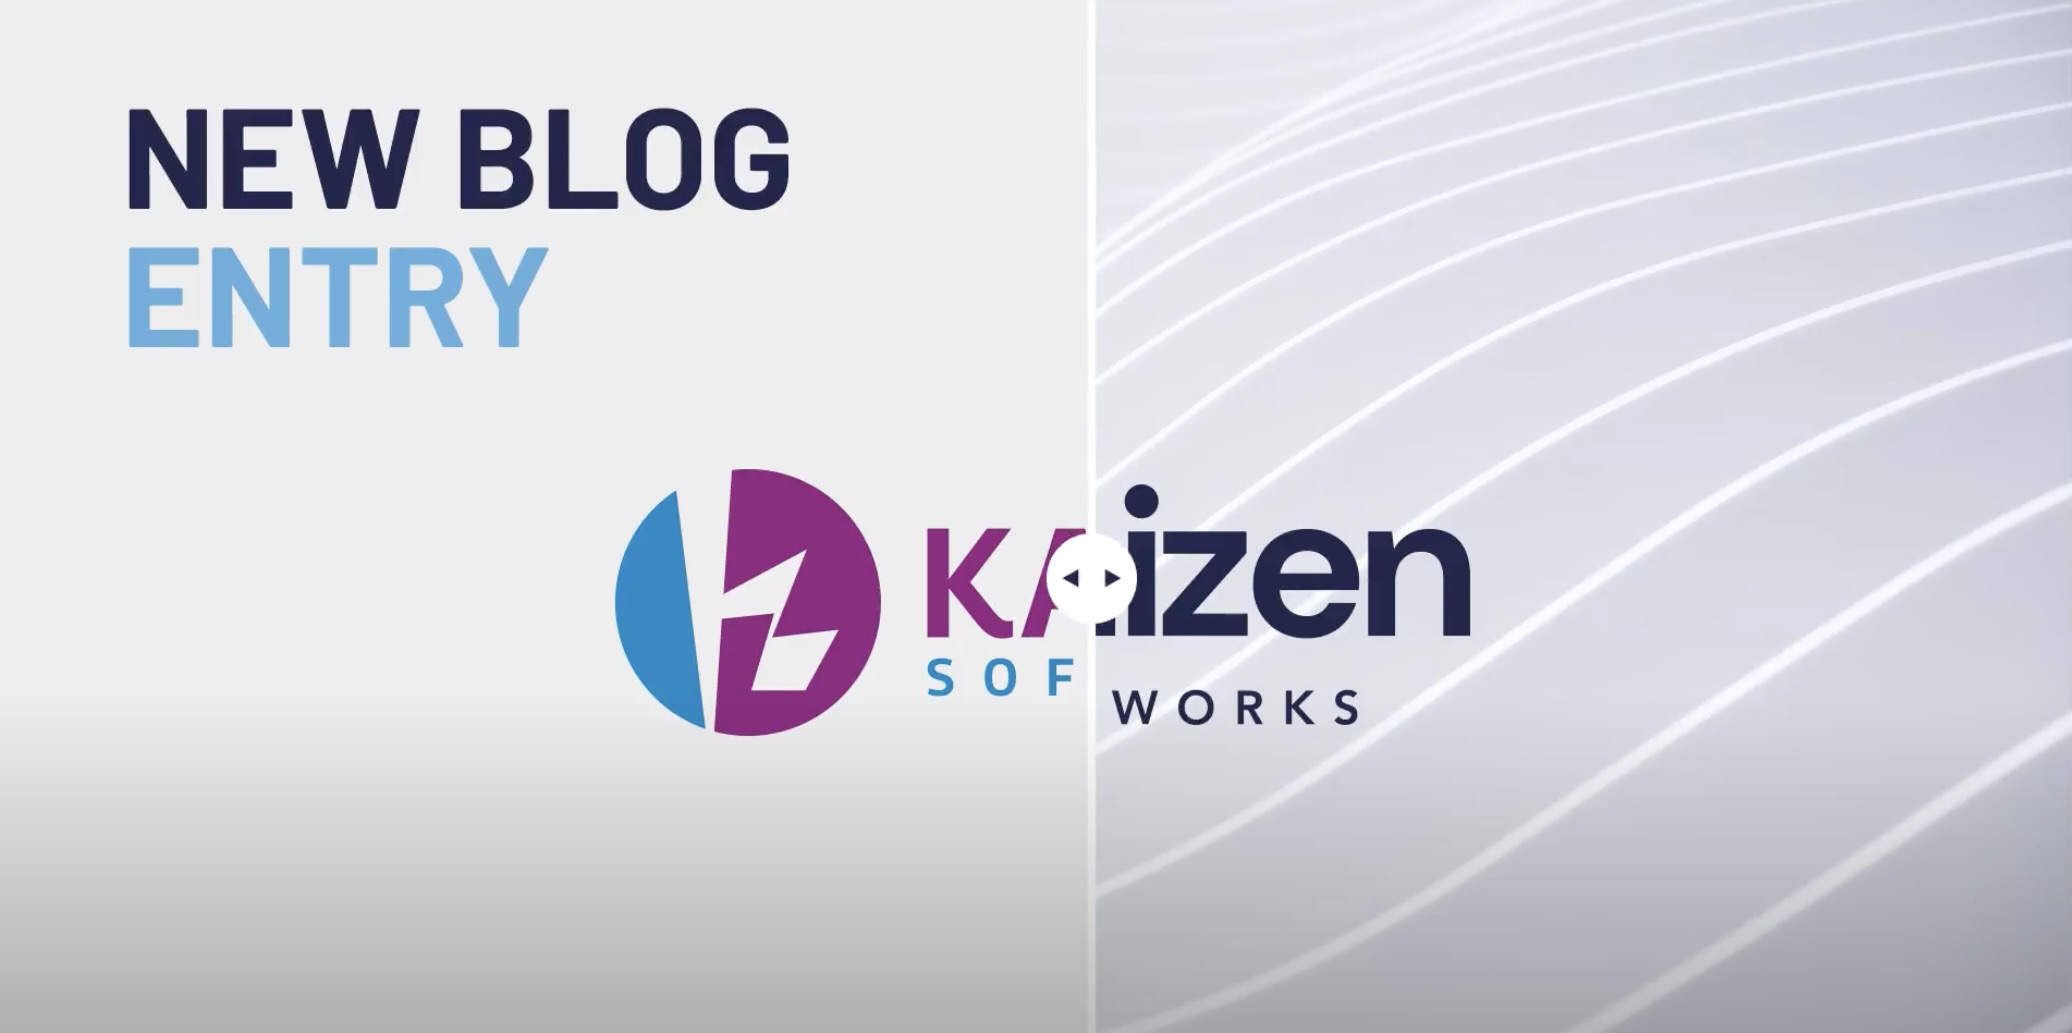 Kaizen Softworks Logos comparison, before and after the rebranding